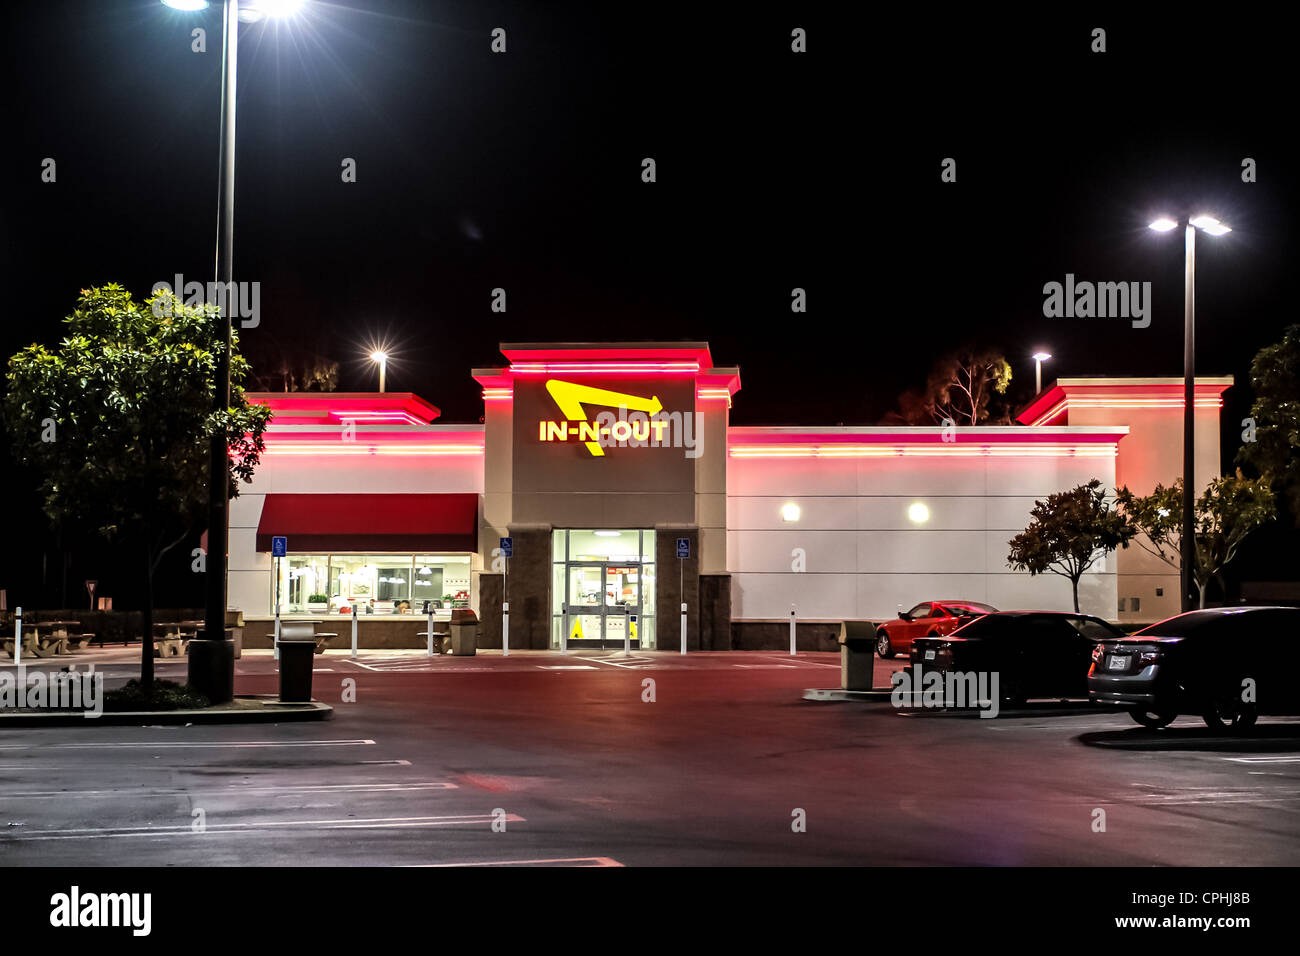 In-N-Out restaurant in Oxnard California at night Stock Photo